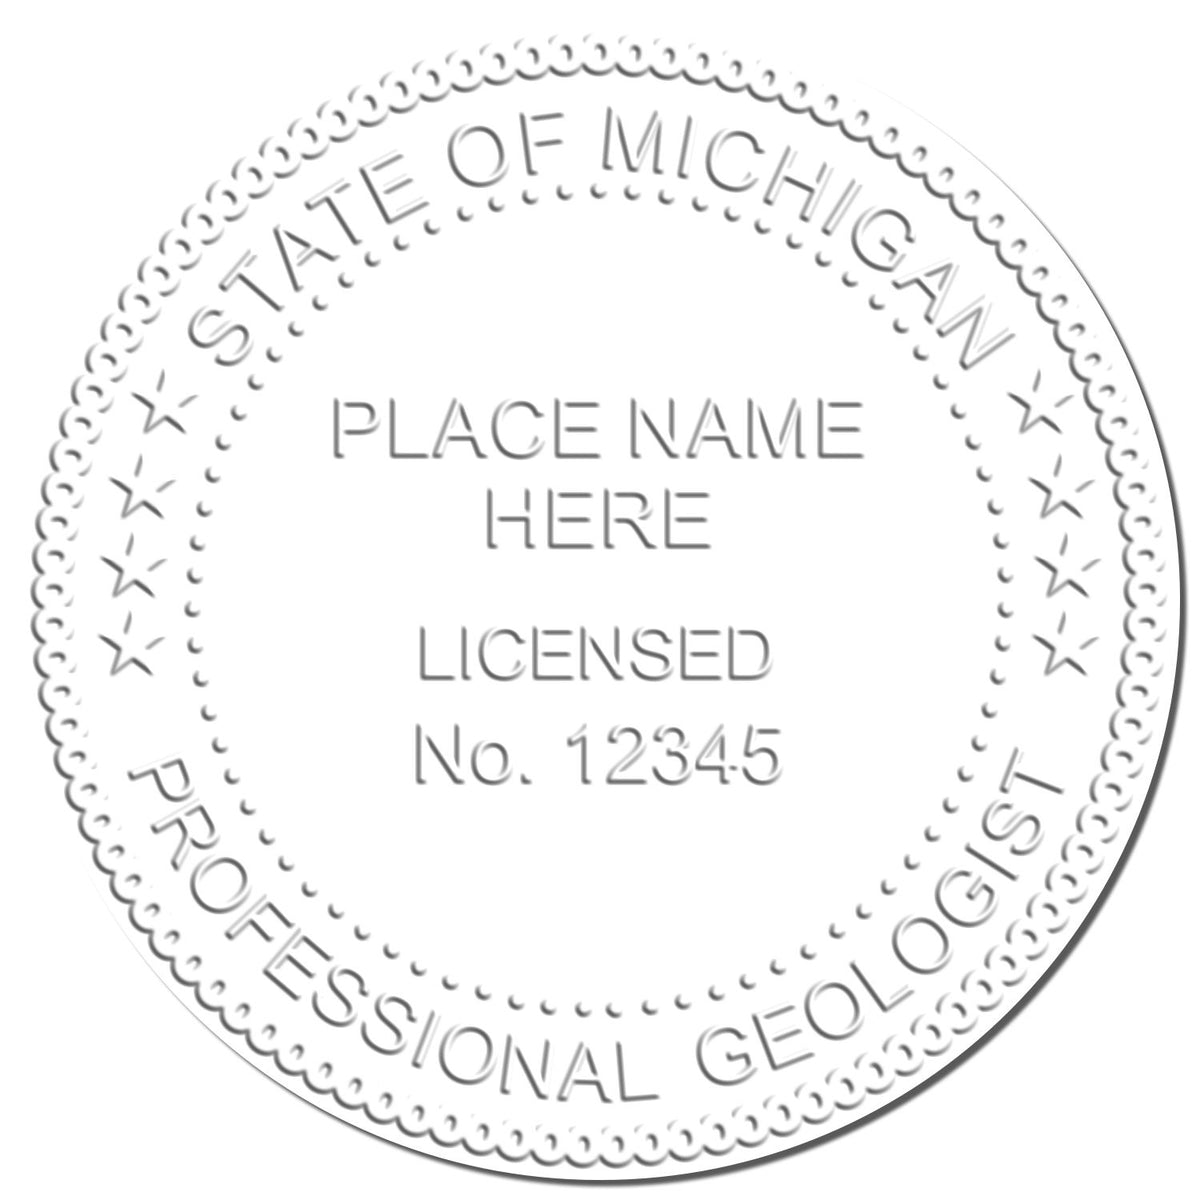 A photograph of the State of Michigan Extended Long Reach Geologist Seal stamp impression reveals a vivid, professional image of the on paper.